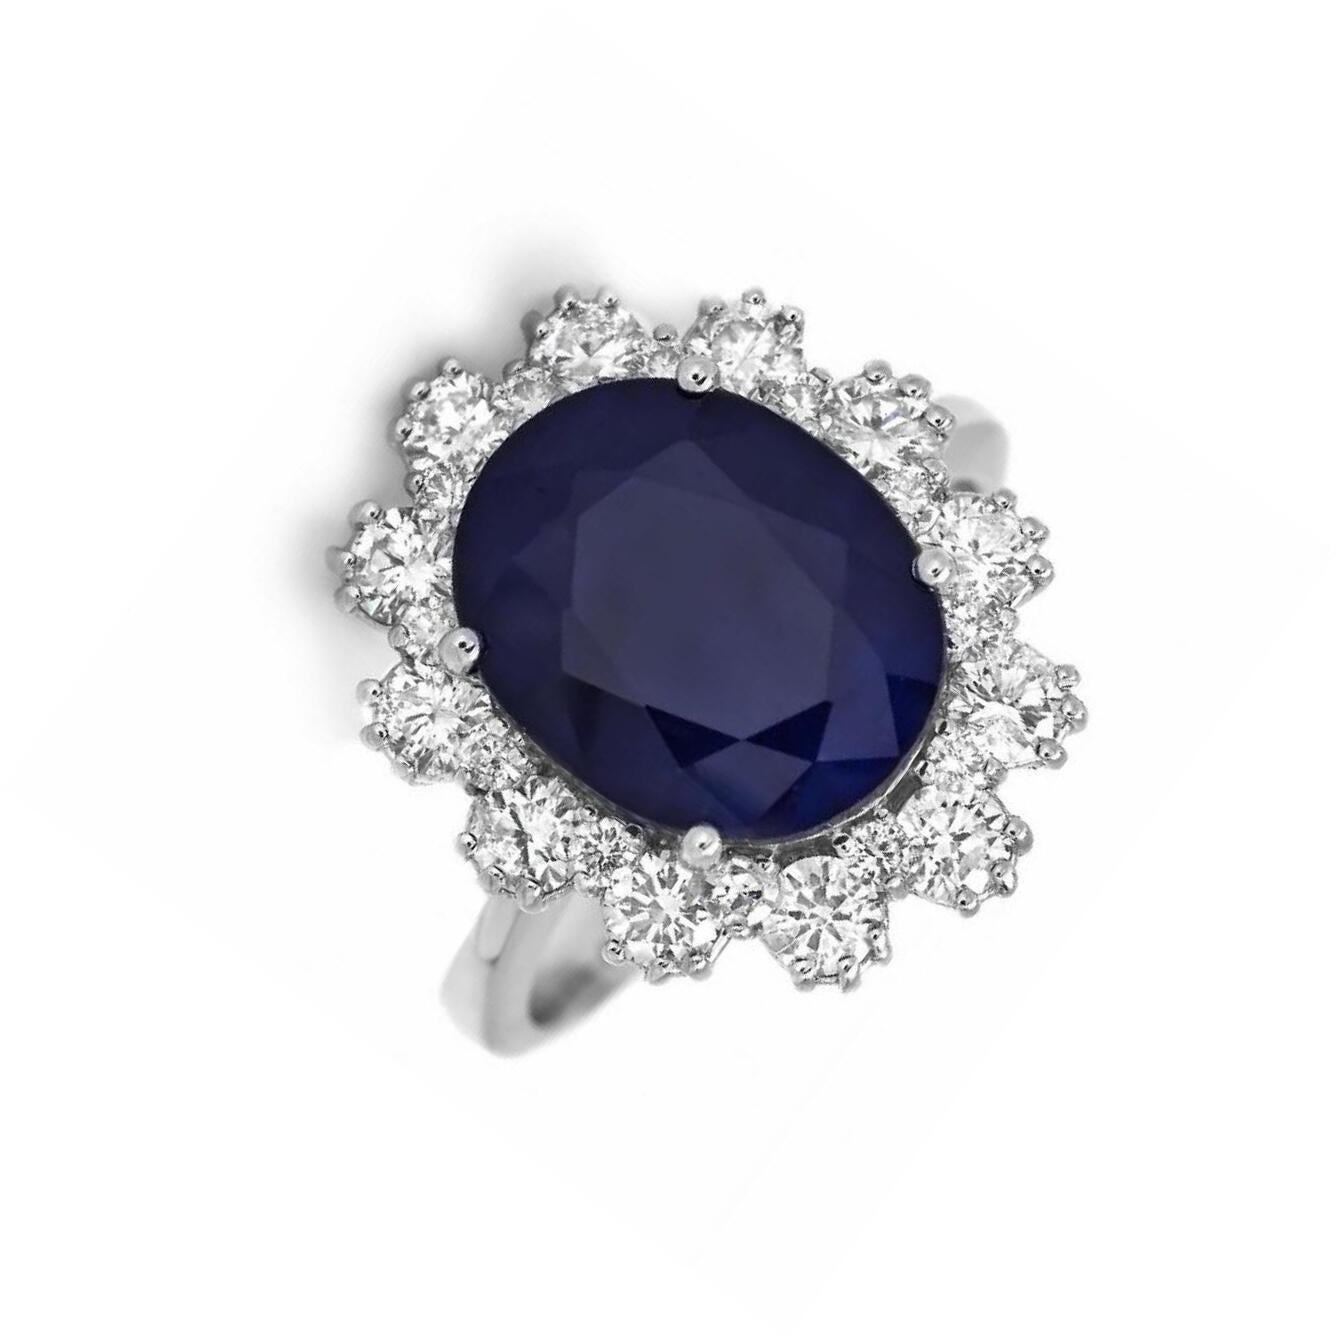 6.20 Carats Natural Sapphire and Diamond 14K Solid White Gold Ring

Total Natural Oval Cut Sapphire Weights: Approx. 5.00 Carats

Sapphire Measures: Approx. 12.00 x 10.00mm

Sapphire Treatment: Diffusion

Natural Round Diamonds Weight: Approx. 1.20